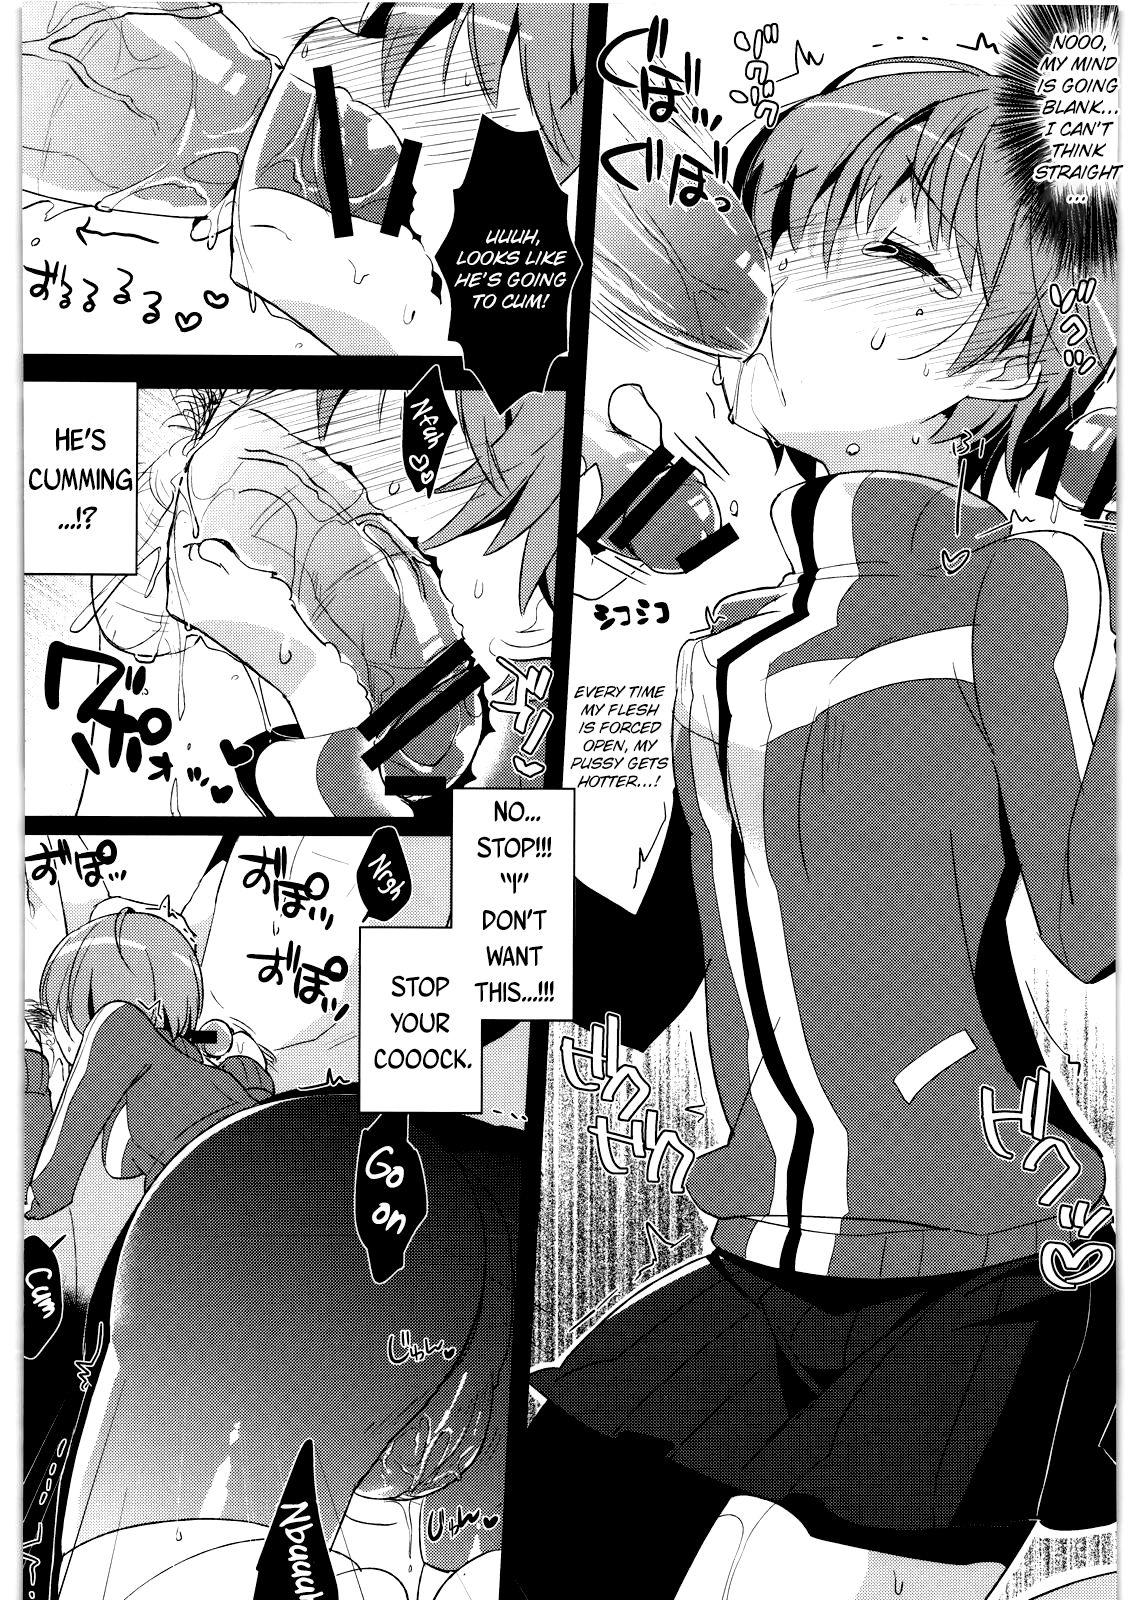 Groupsex PX - Persona 4 Deep Throat - Page 9